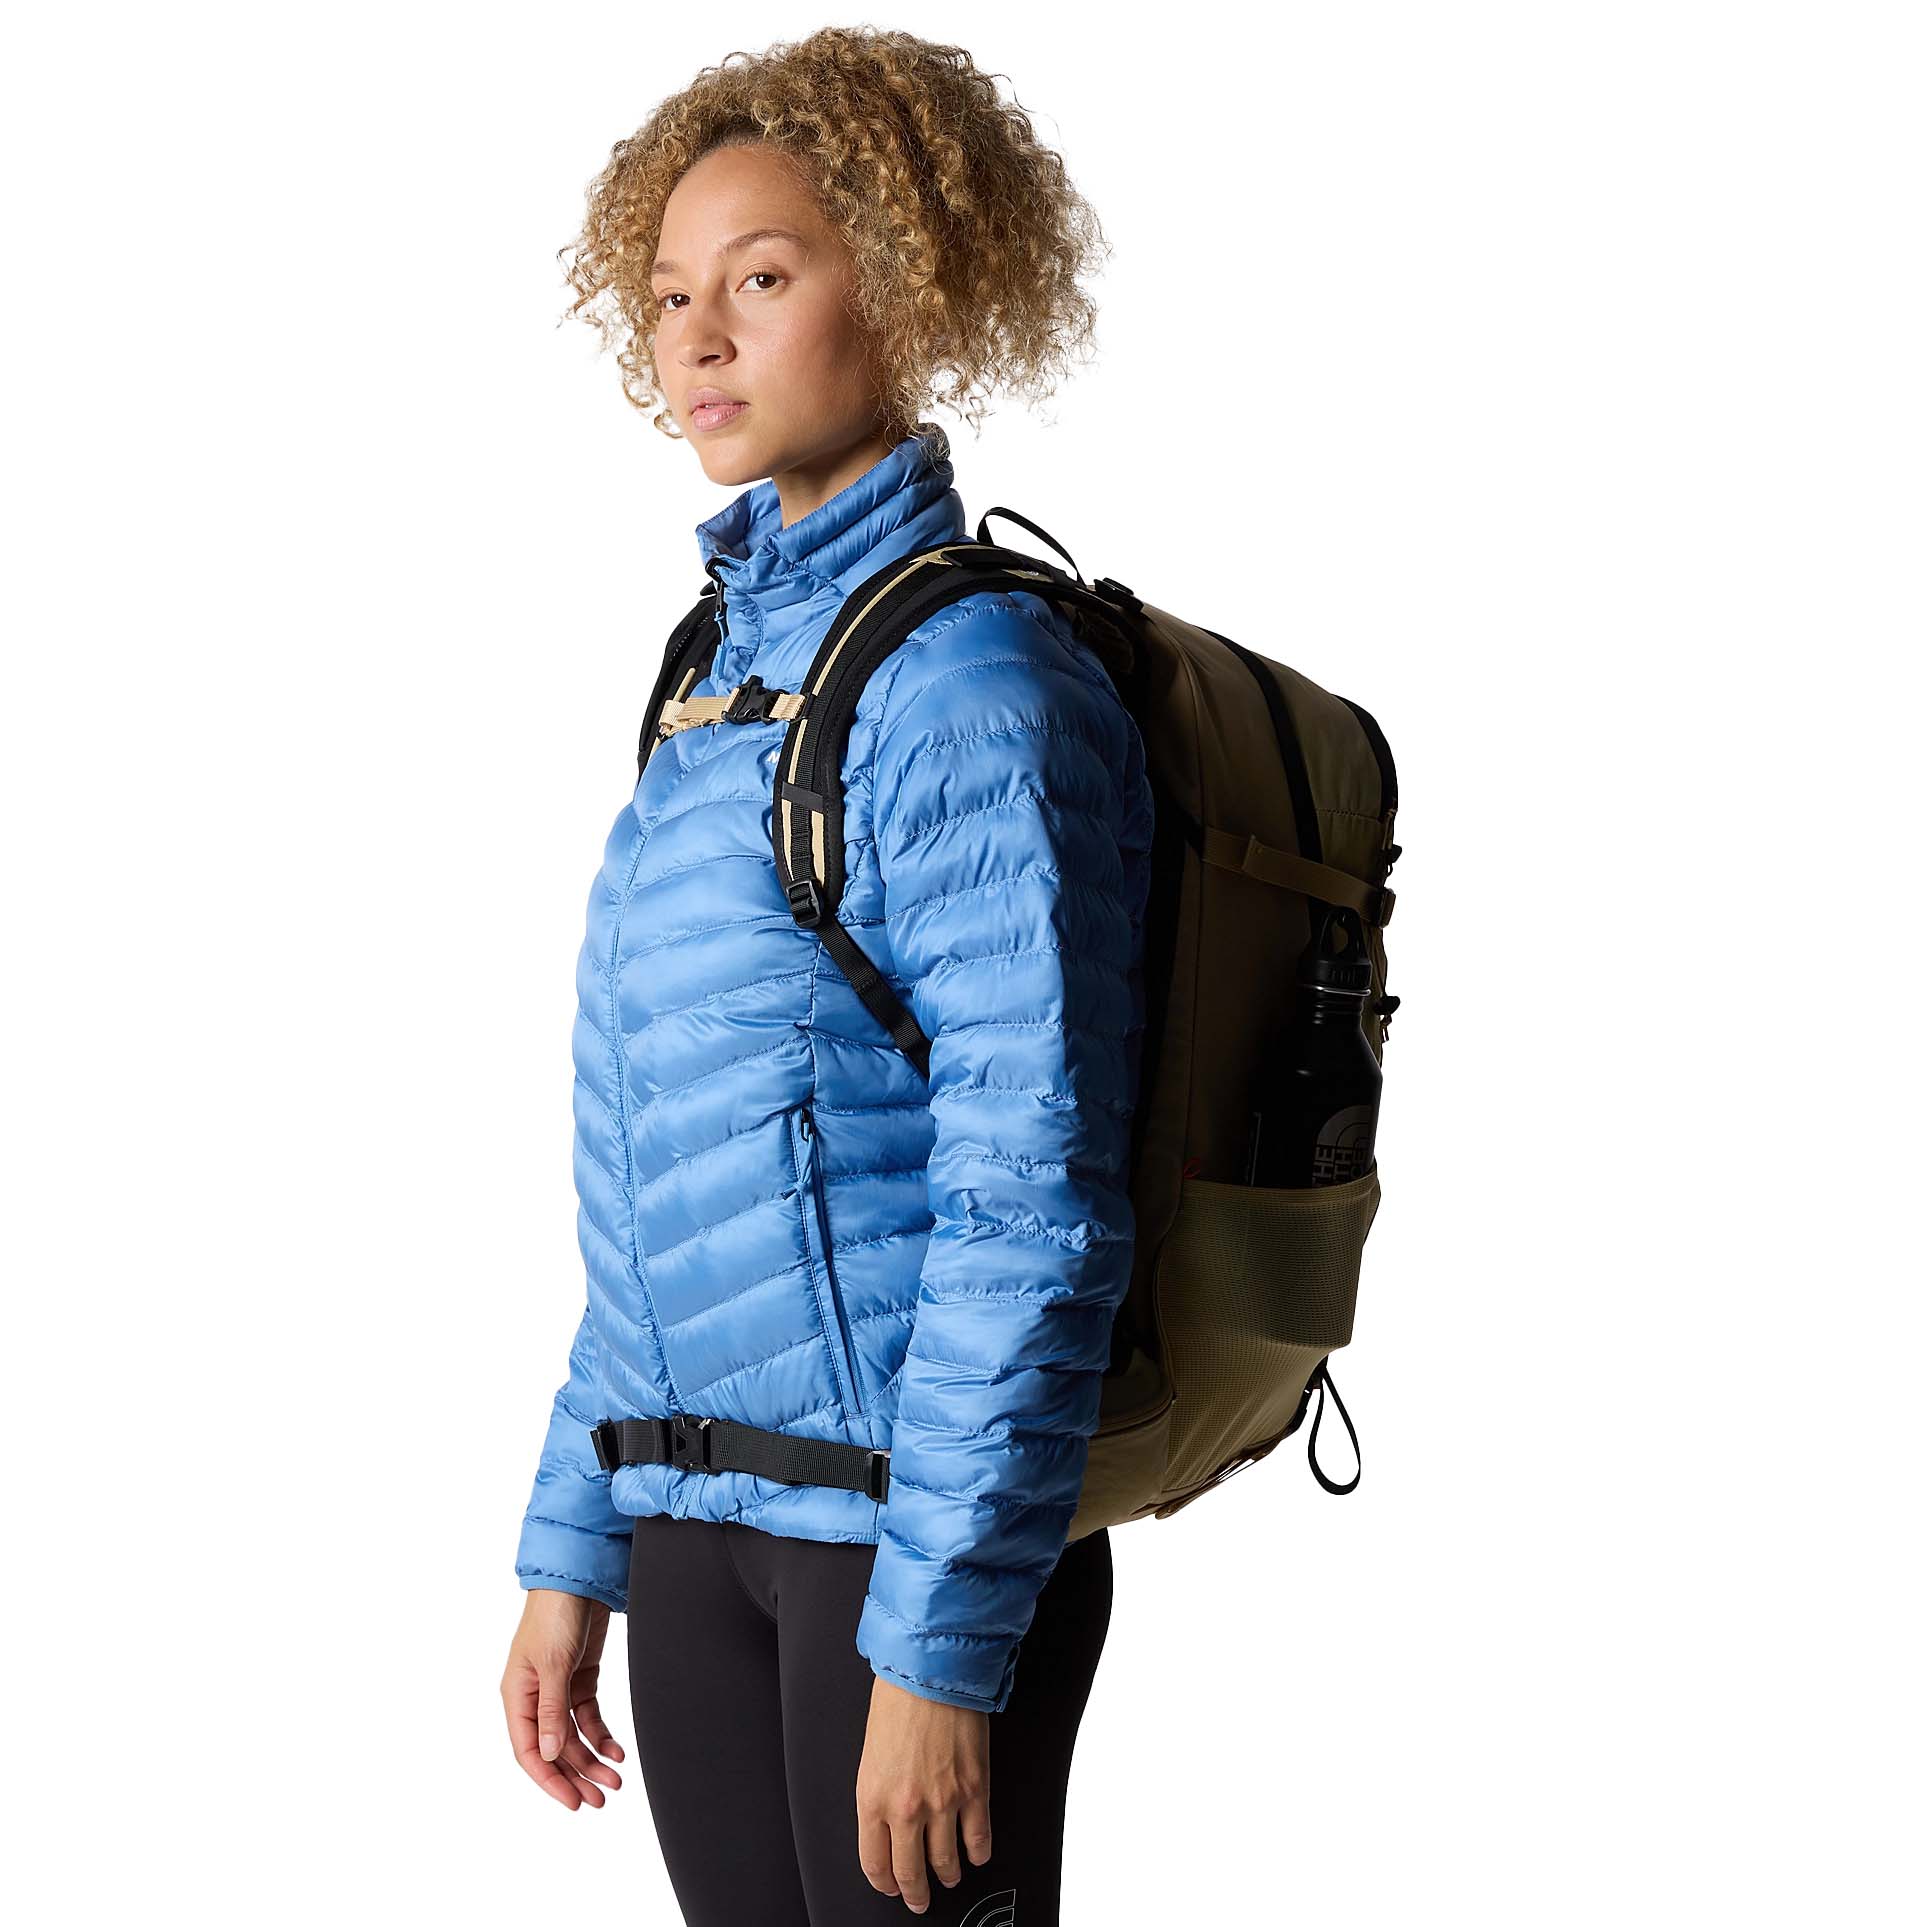 The North Face Basin 36 Hiking Backpack